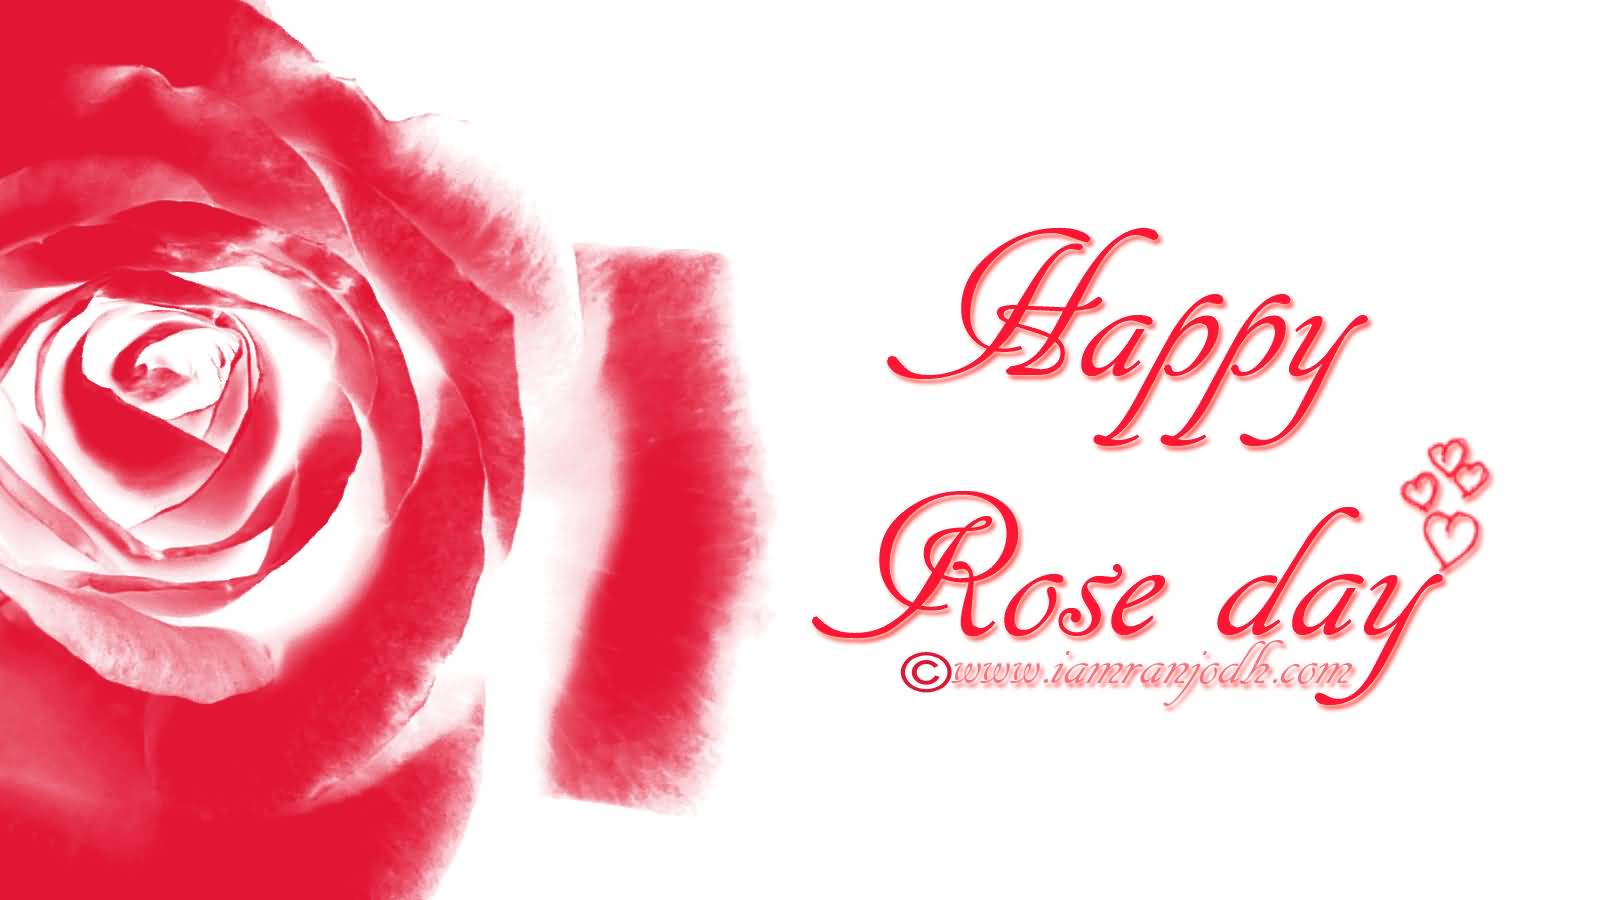 Happy Rose Day 2017 HD Wallpapers